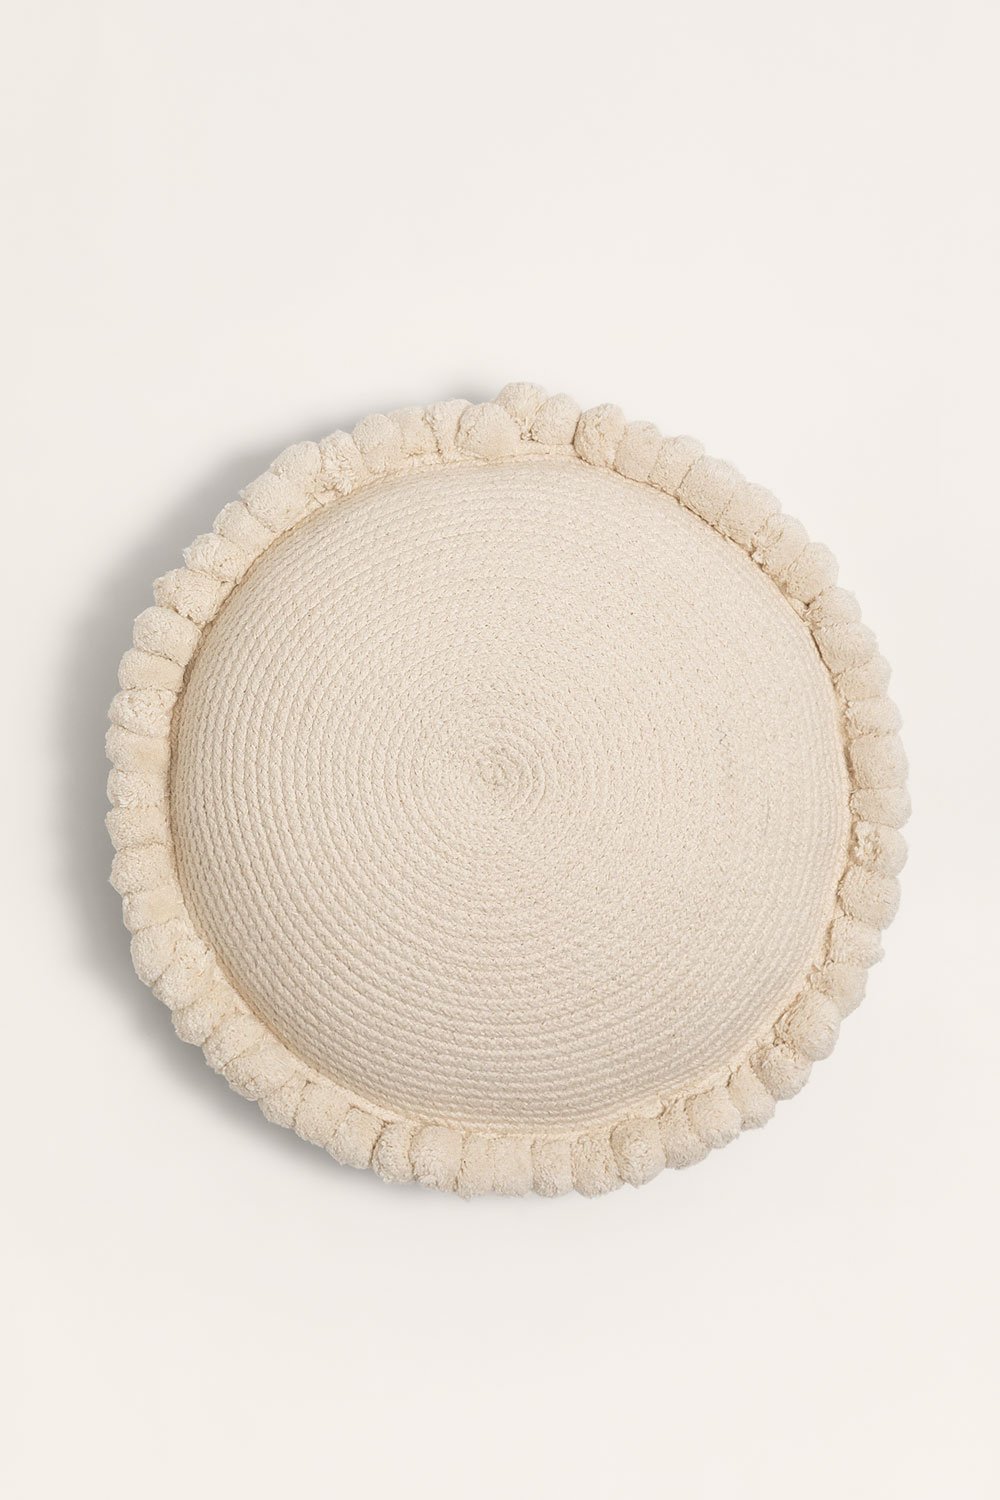 Olets Round Cotton Braided Cushion, gallery image 1